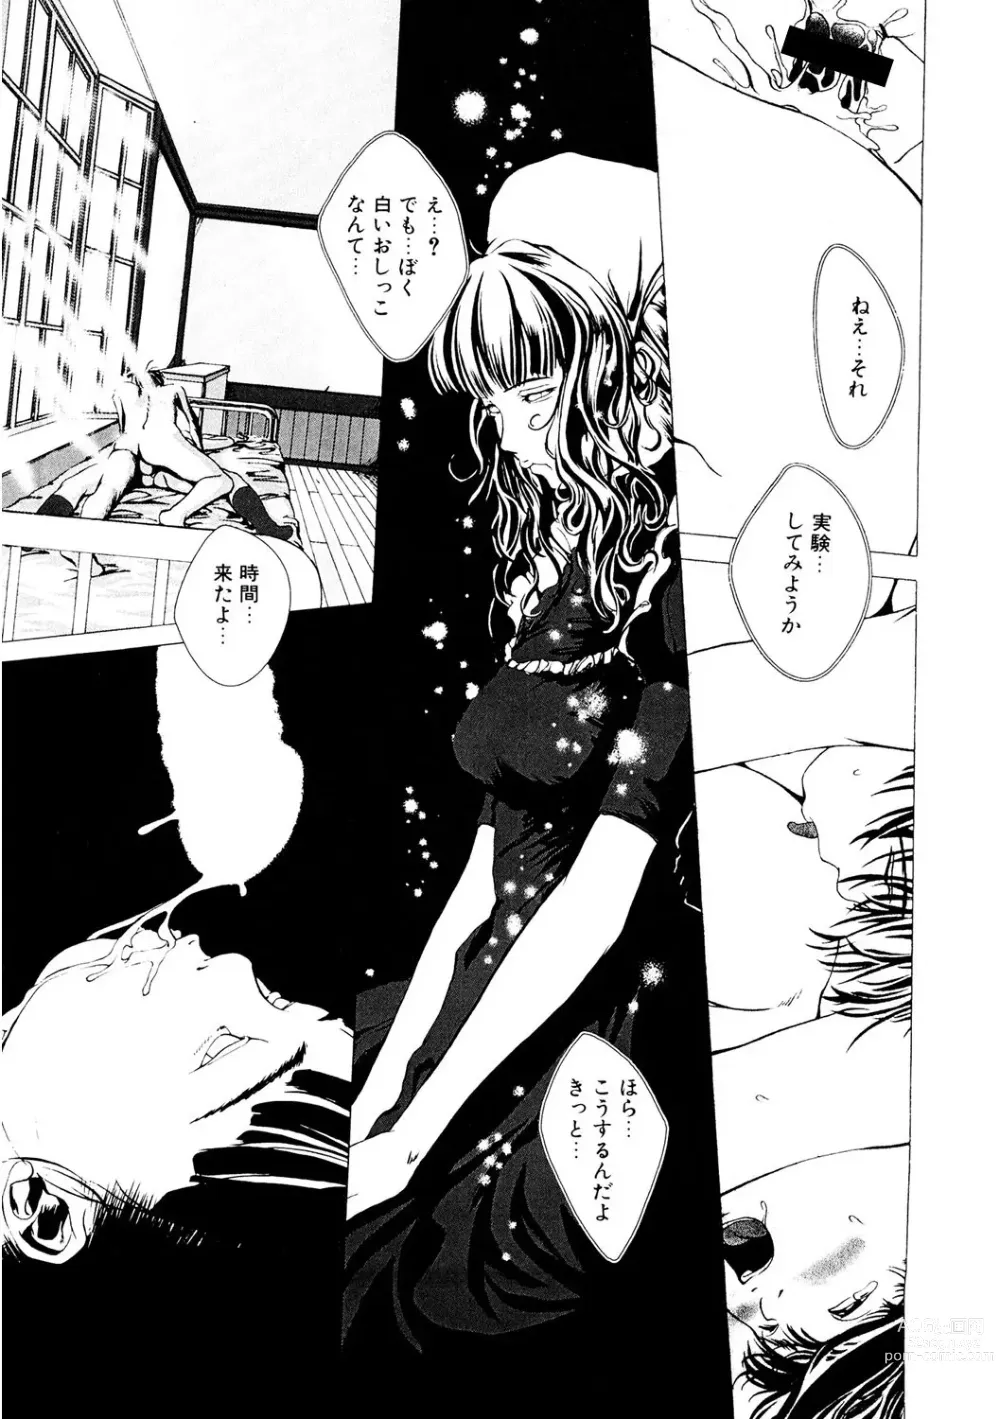 Page 170 of manga LQ -Little Queen- Vol. 53